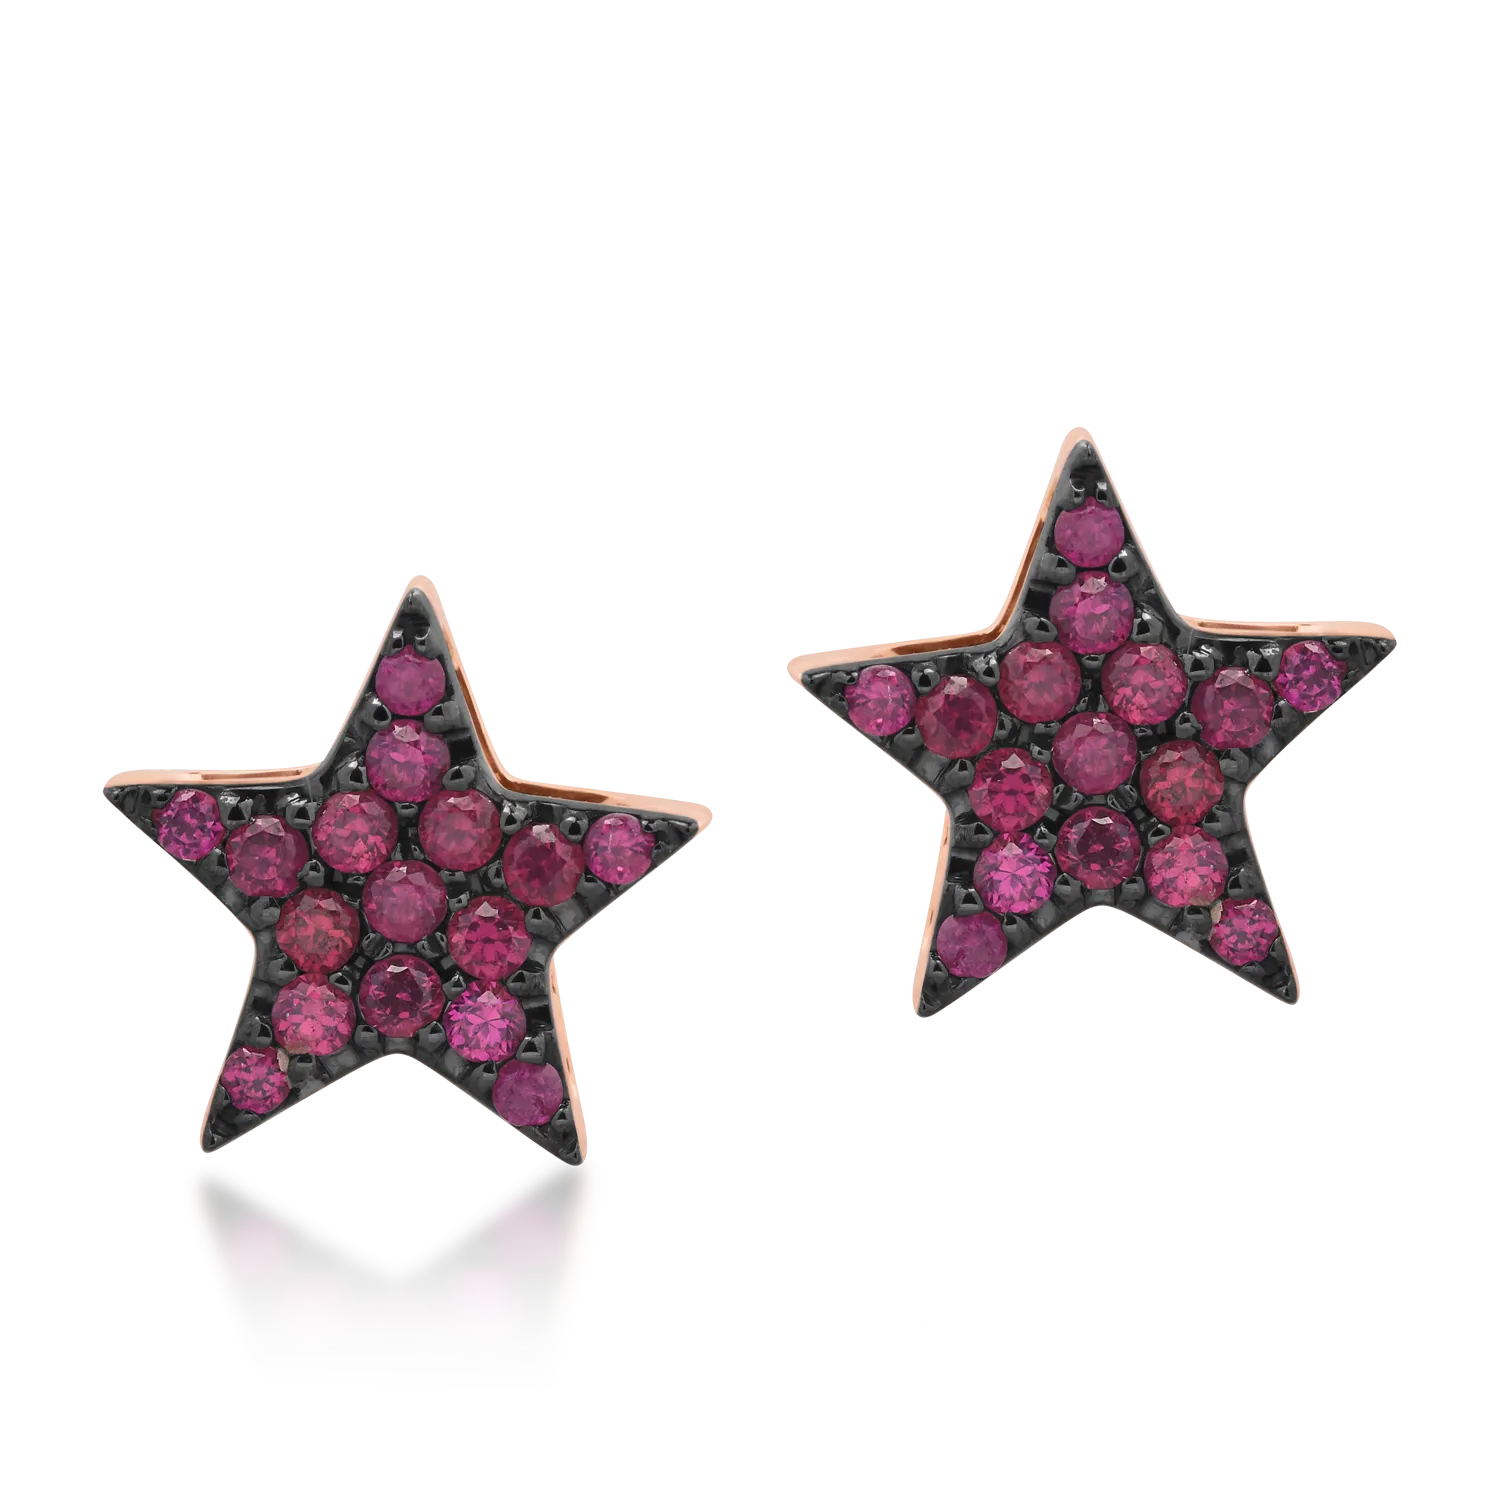 18K rose gold star earrings with 0.21ct rubies